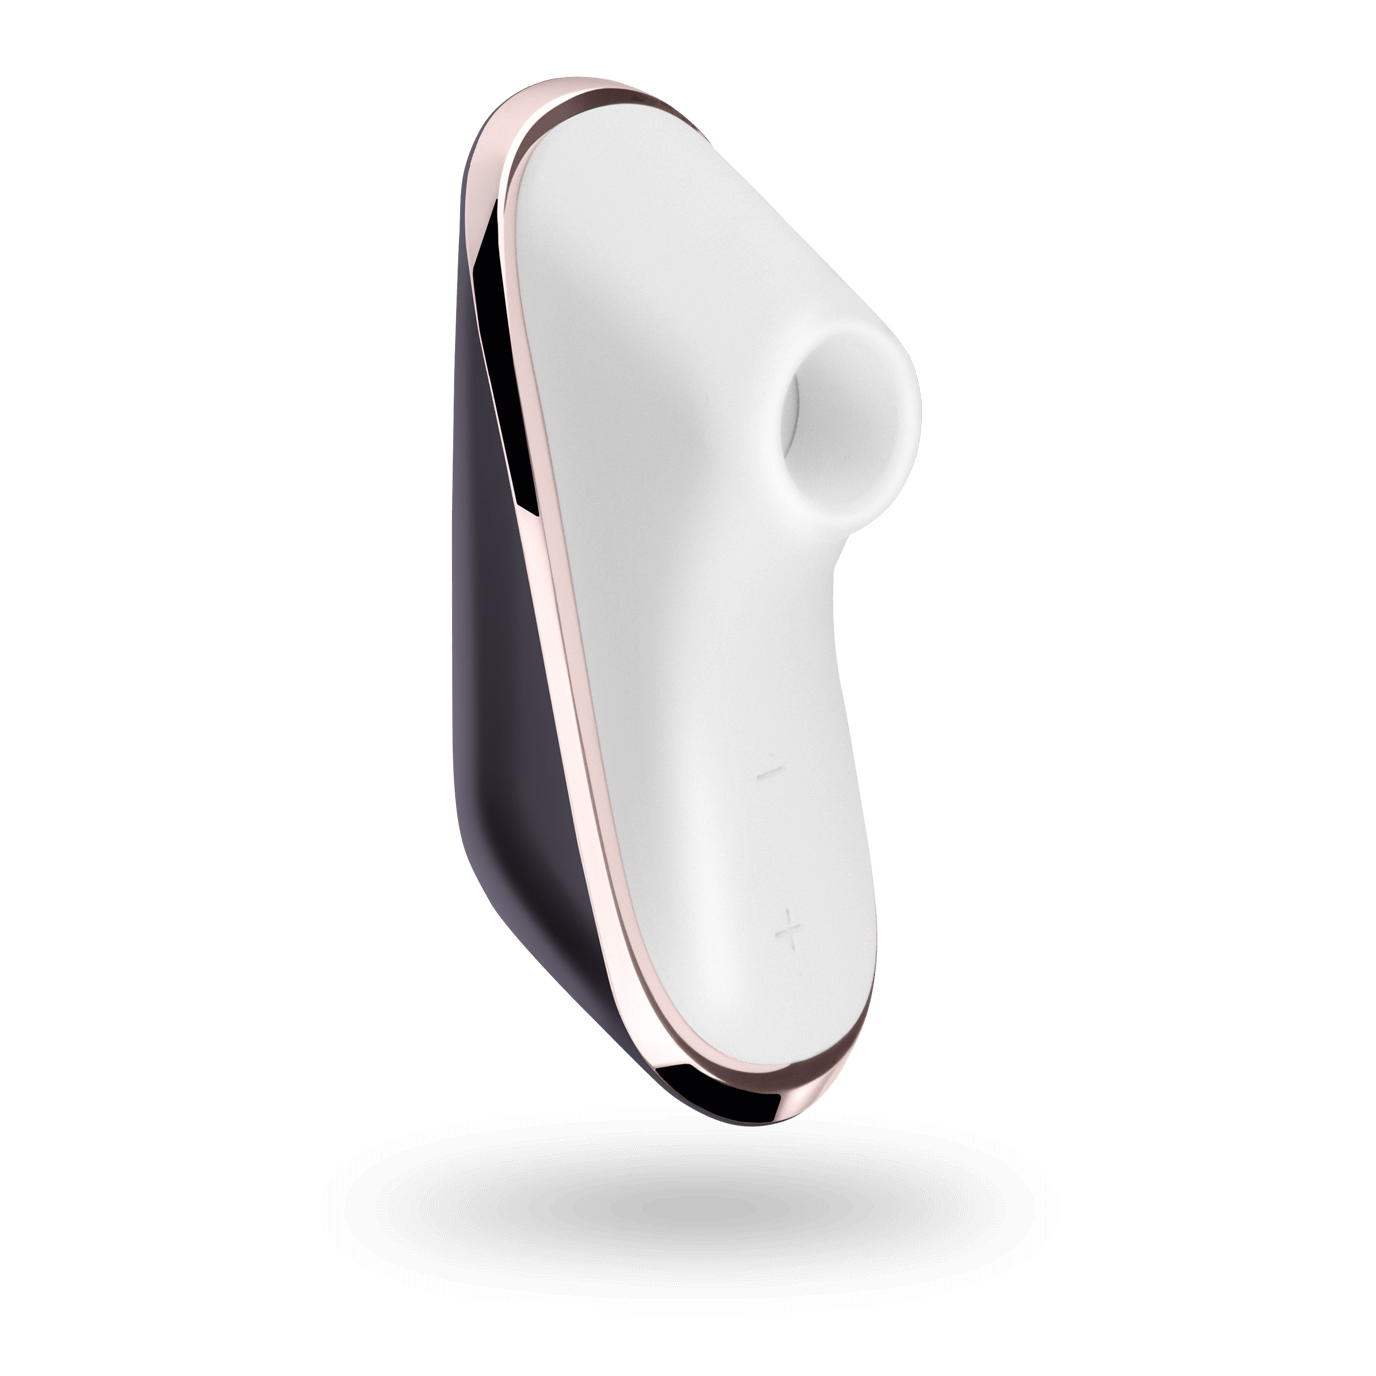 Satisfyer Pro Traveler - by The Bigger O an online sex toy shop. We ship to USA, Canada and the UK.